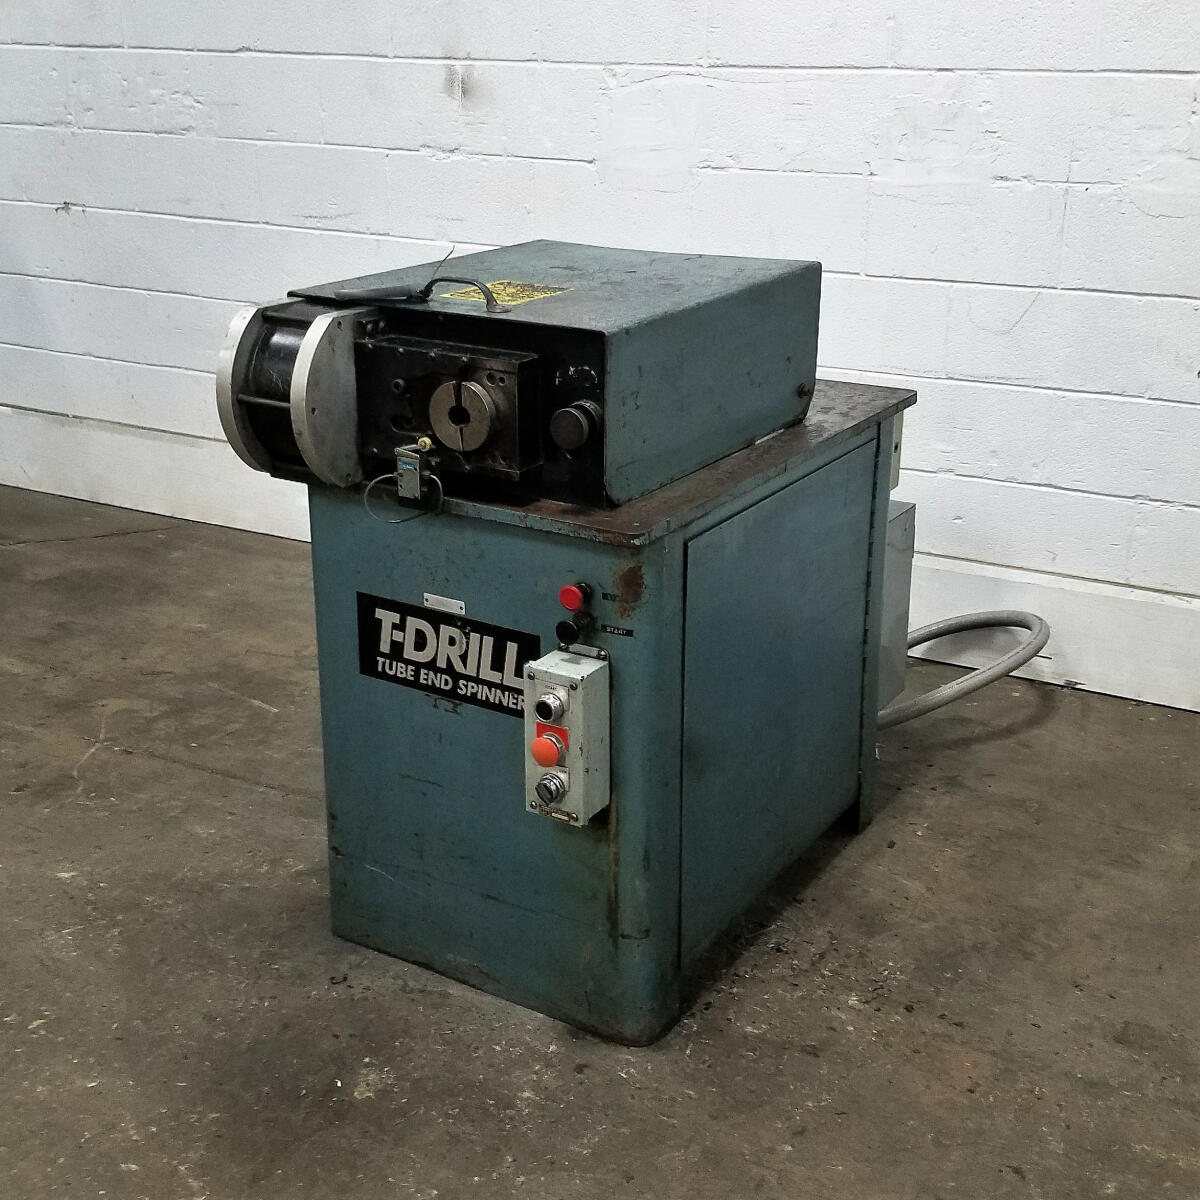 Additional image #1 for 2-5/8" T-Drill #PFC-55 Tube End Spinning and Forming Machine  -SOLD